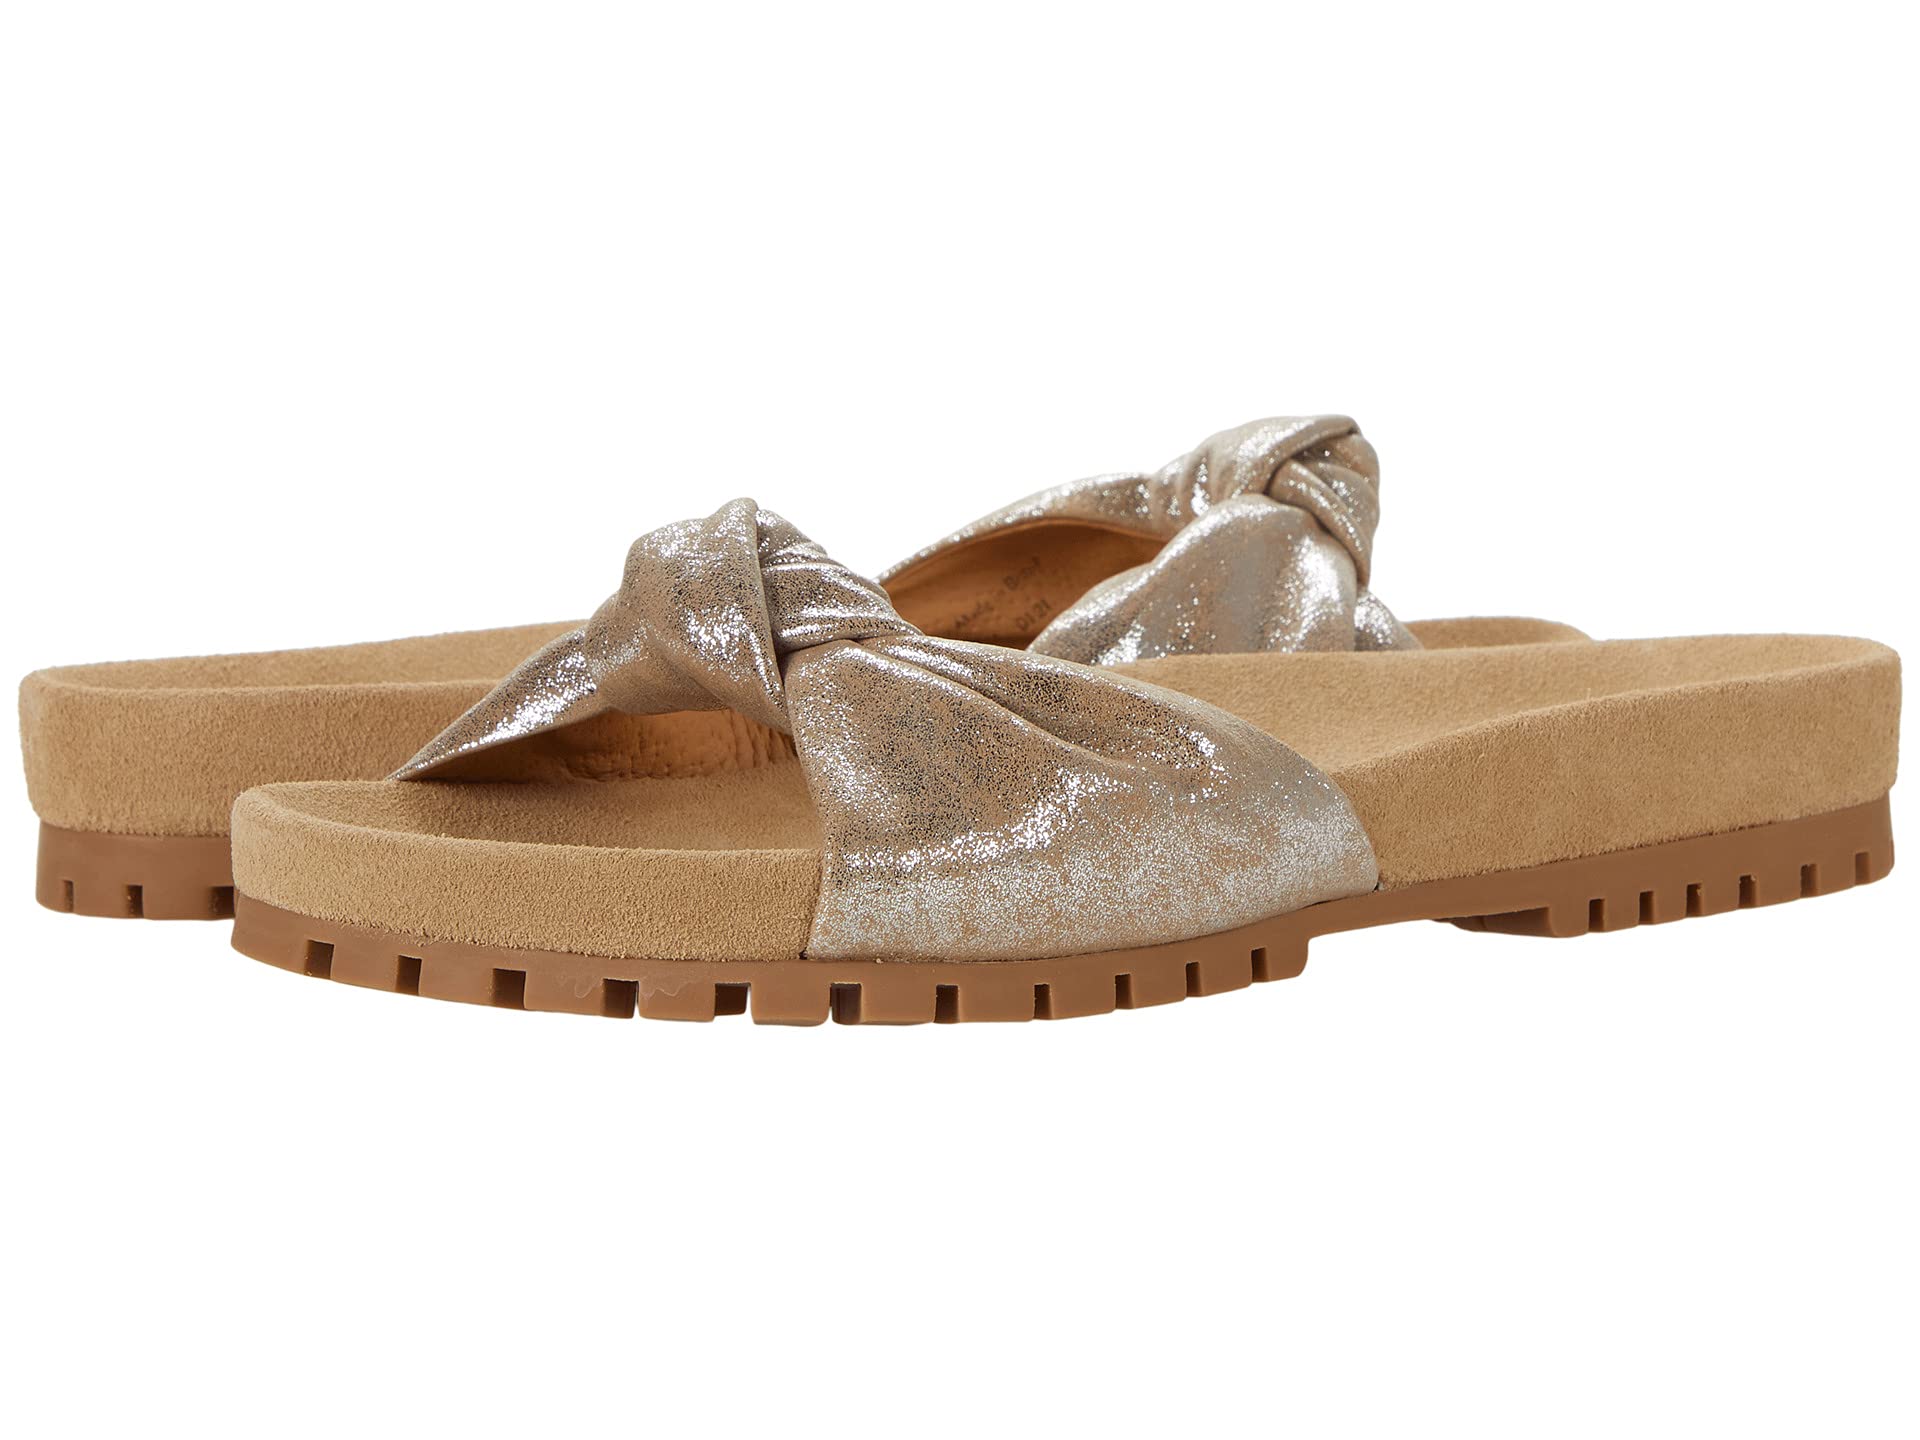 Шлепанцы Jack Rogers, Phoebe Knotted Comfort Slide